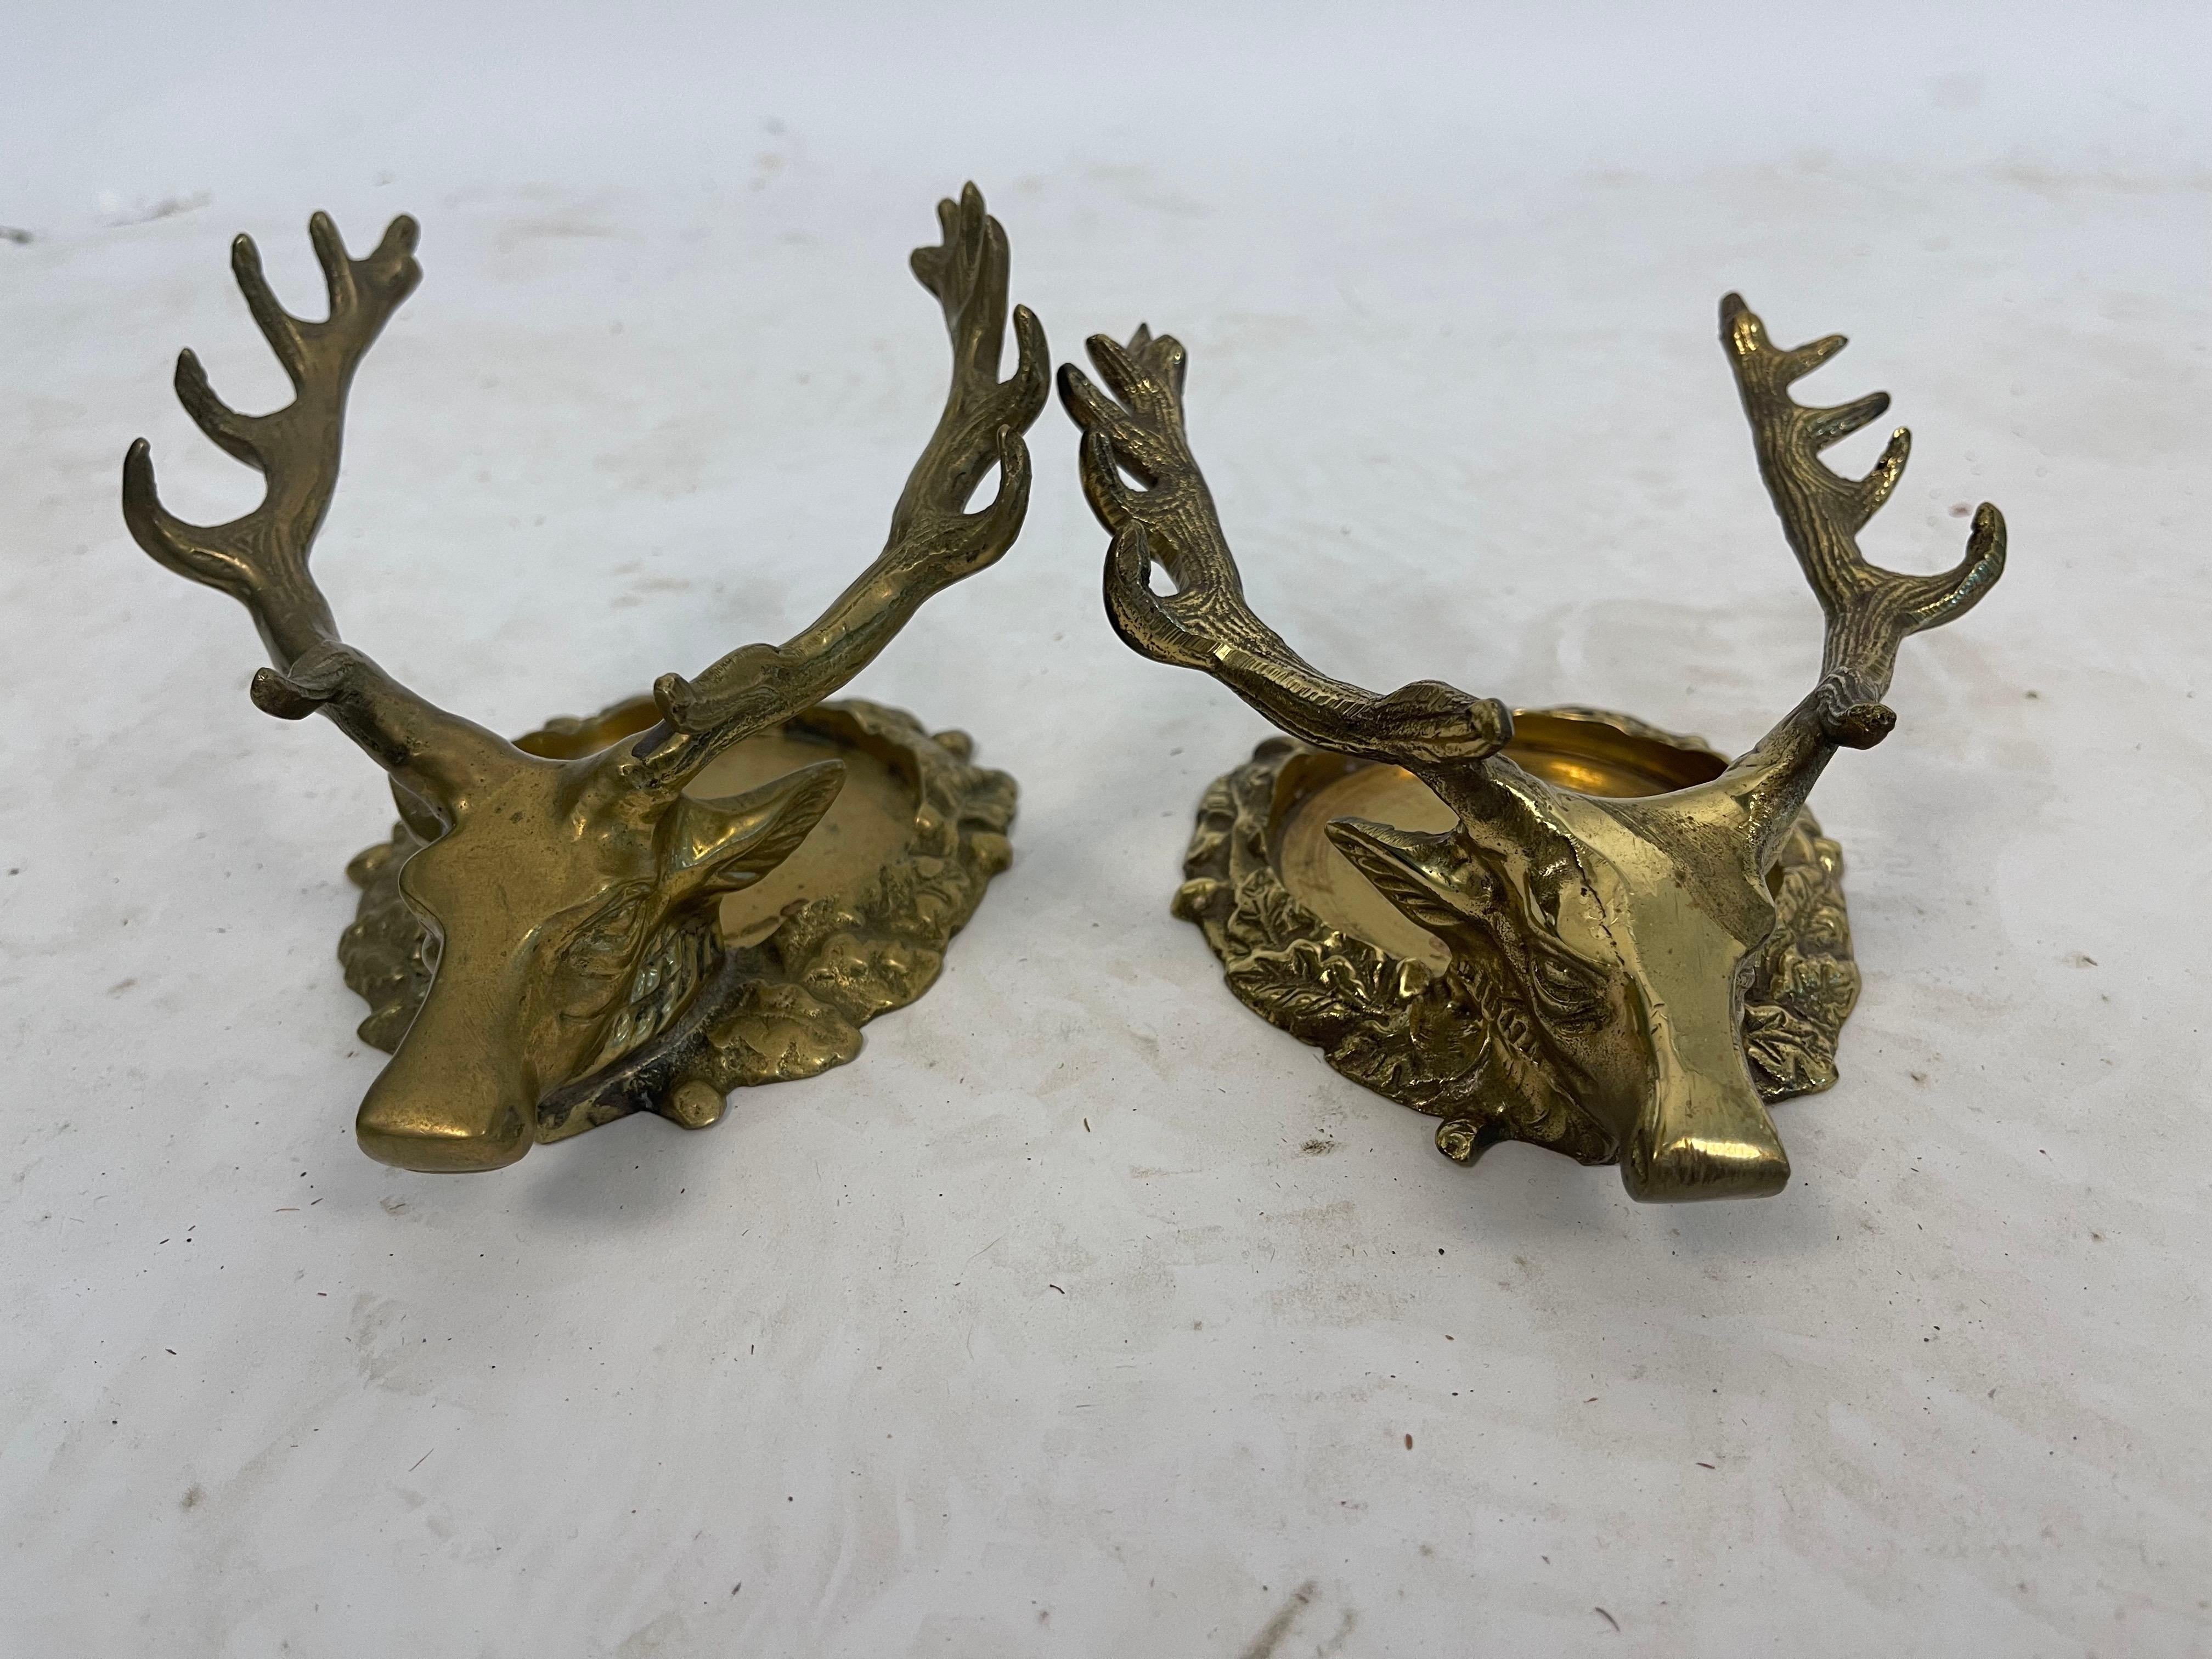 A near pair of brass wine bottle holders to protect your table from wine spills. Made of polished brass and formed into Stag heads with majestic antlers, these wine bottle holders would elevate any table setting. The stags have a decorative collar